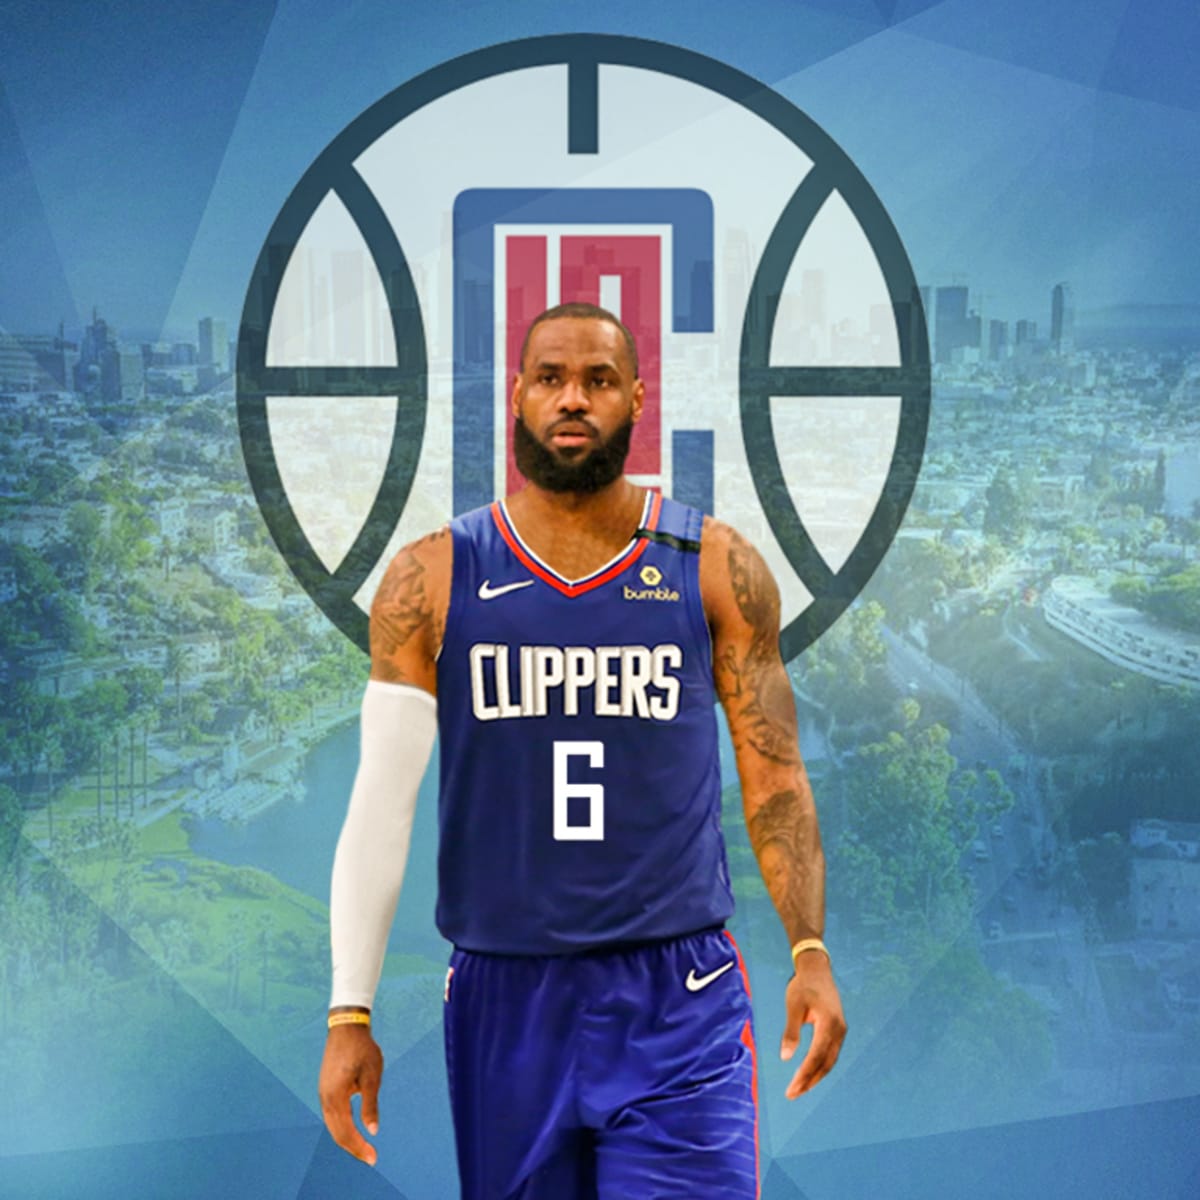 lebron clippers jersey